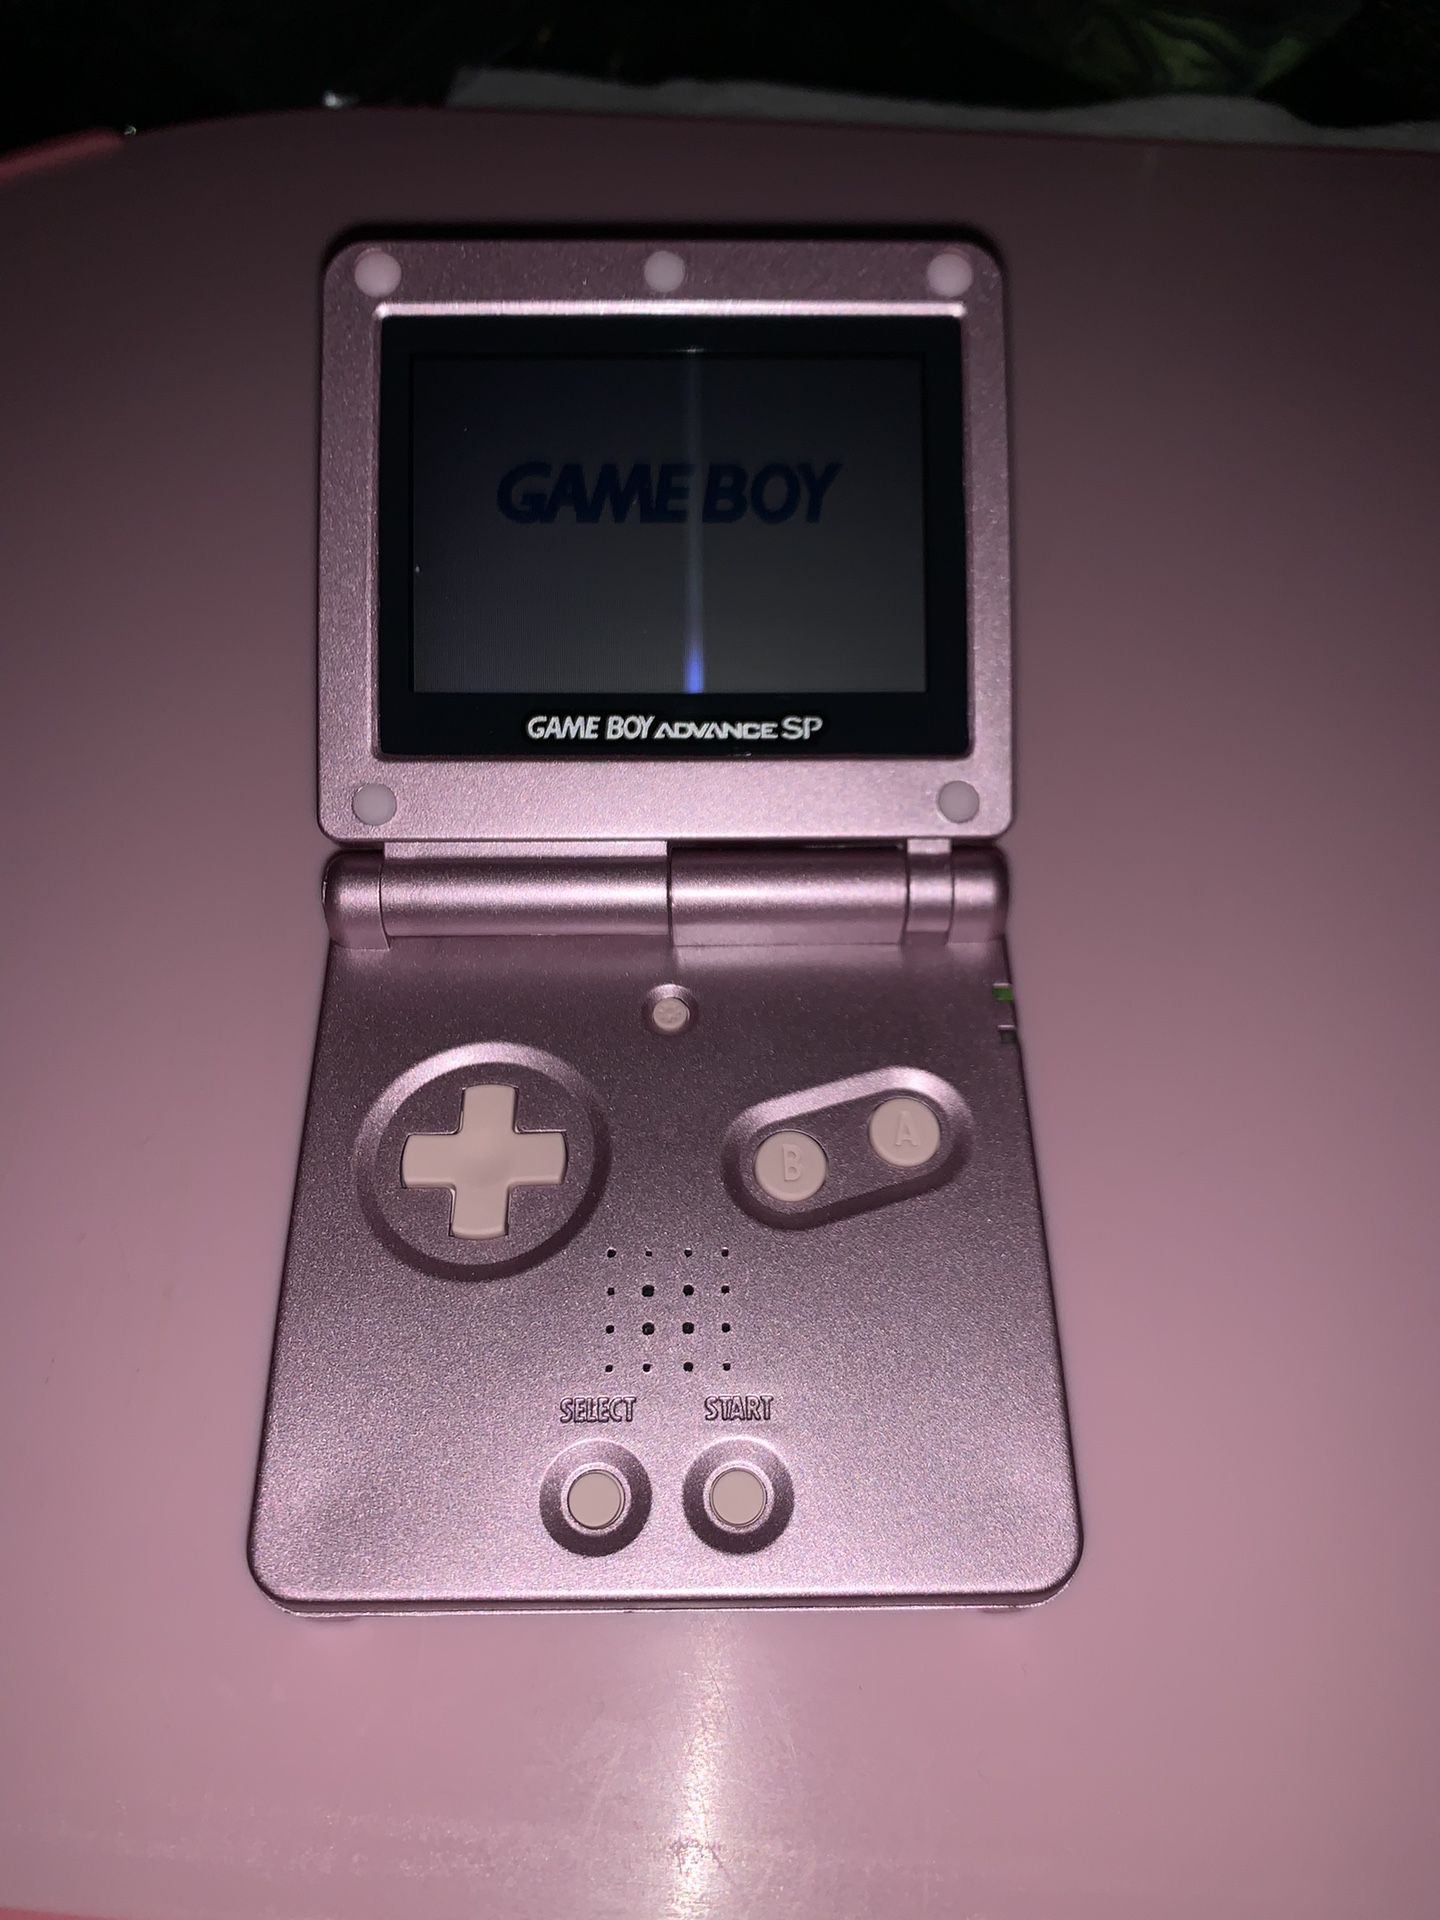 Nintendo GameBoy Advance SP AGS 001 In Pink Shell for Sale in NY - OfferUp